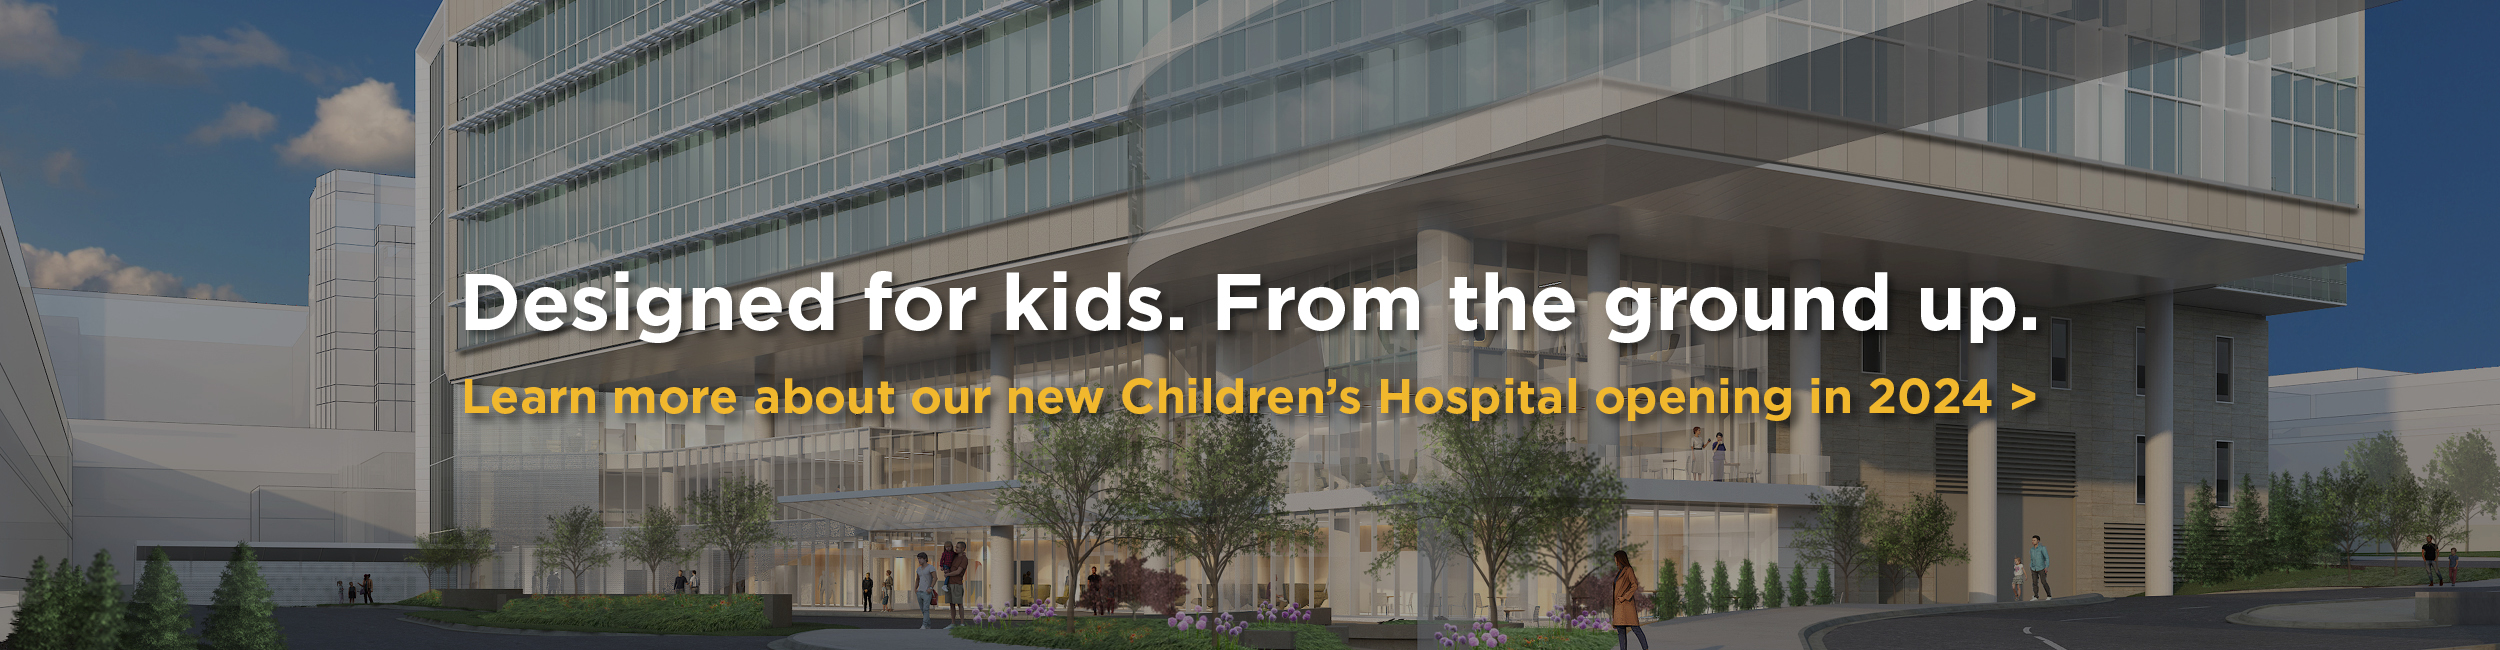 Rendering of new children's hospital at MU Health Care